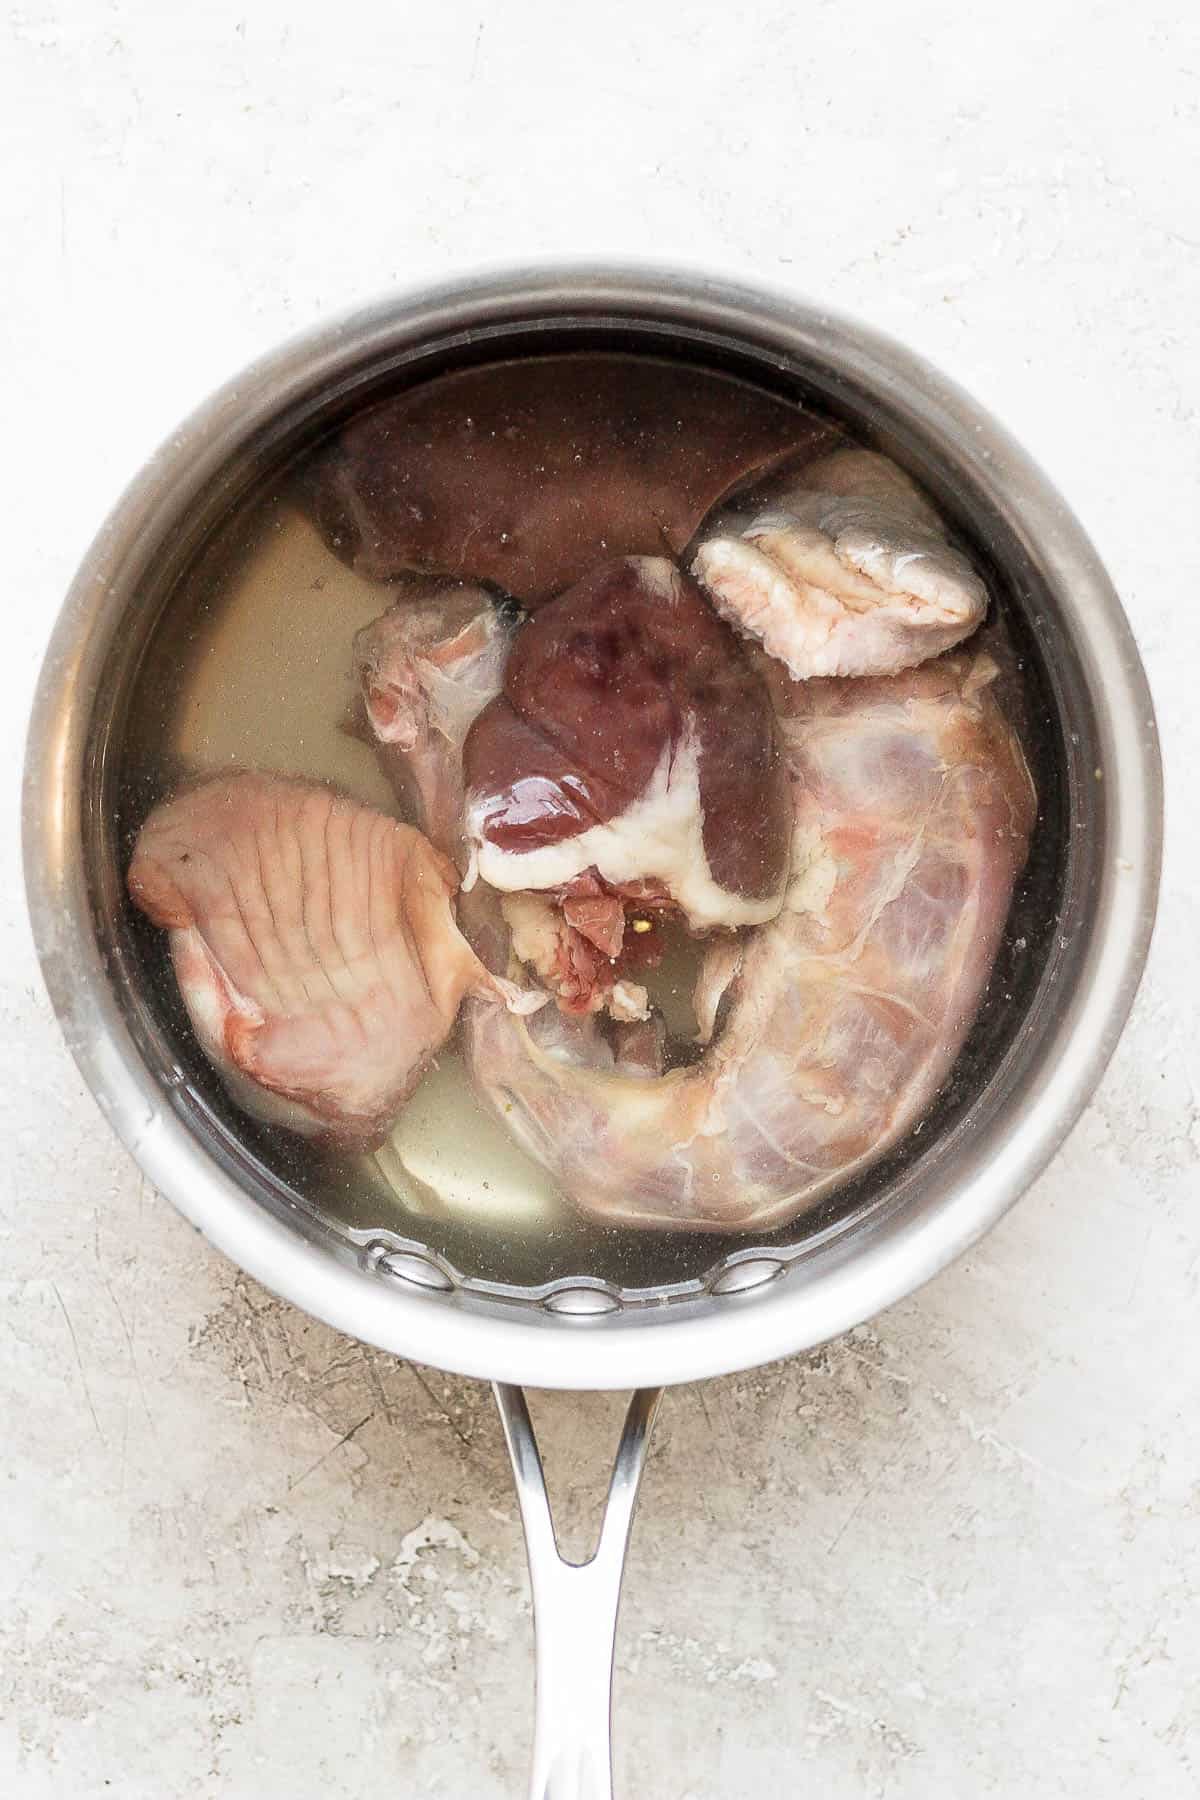 Turkey giblets in a large saucepan with water.